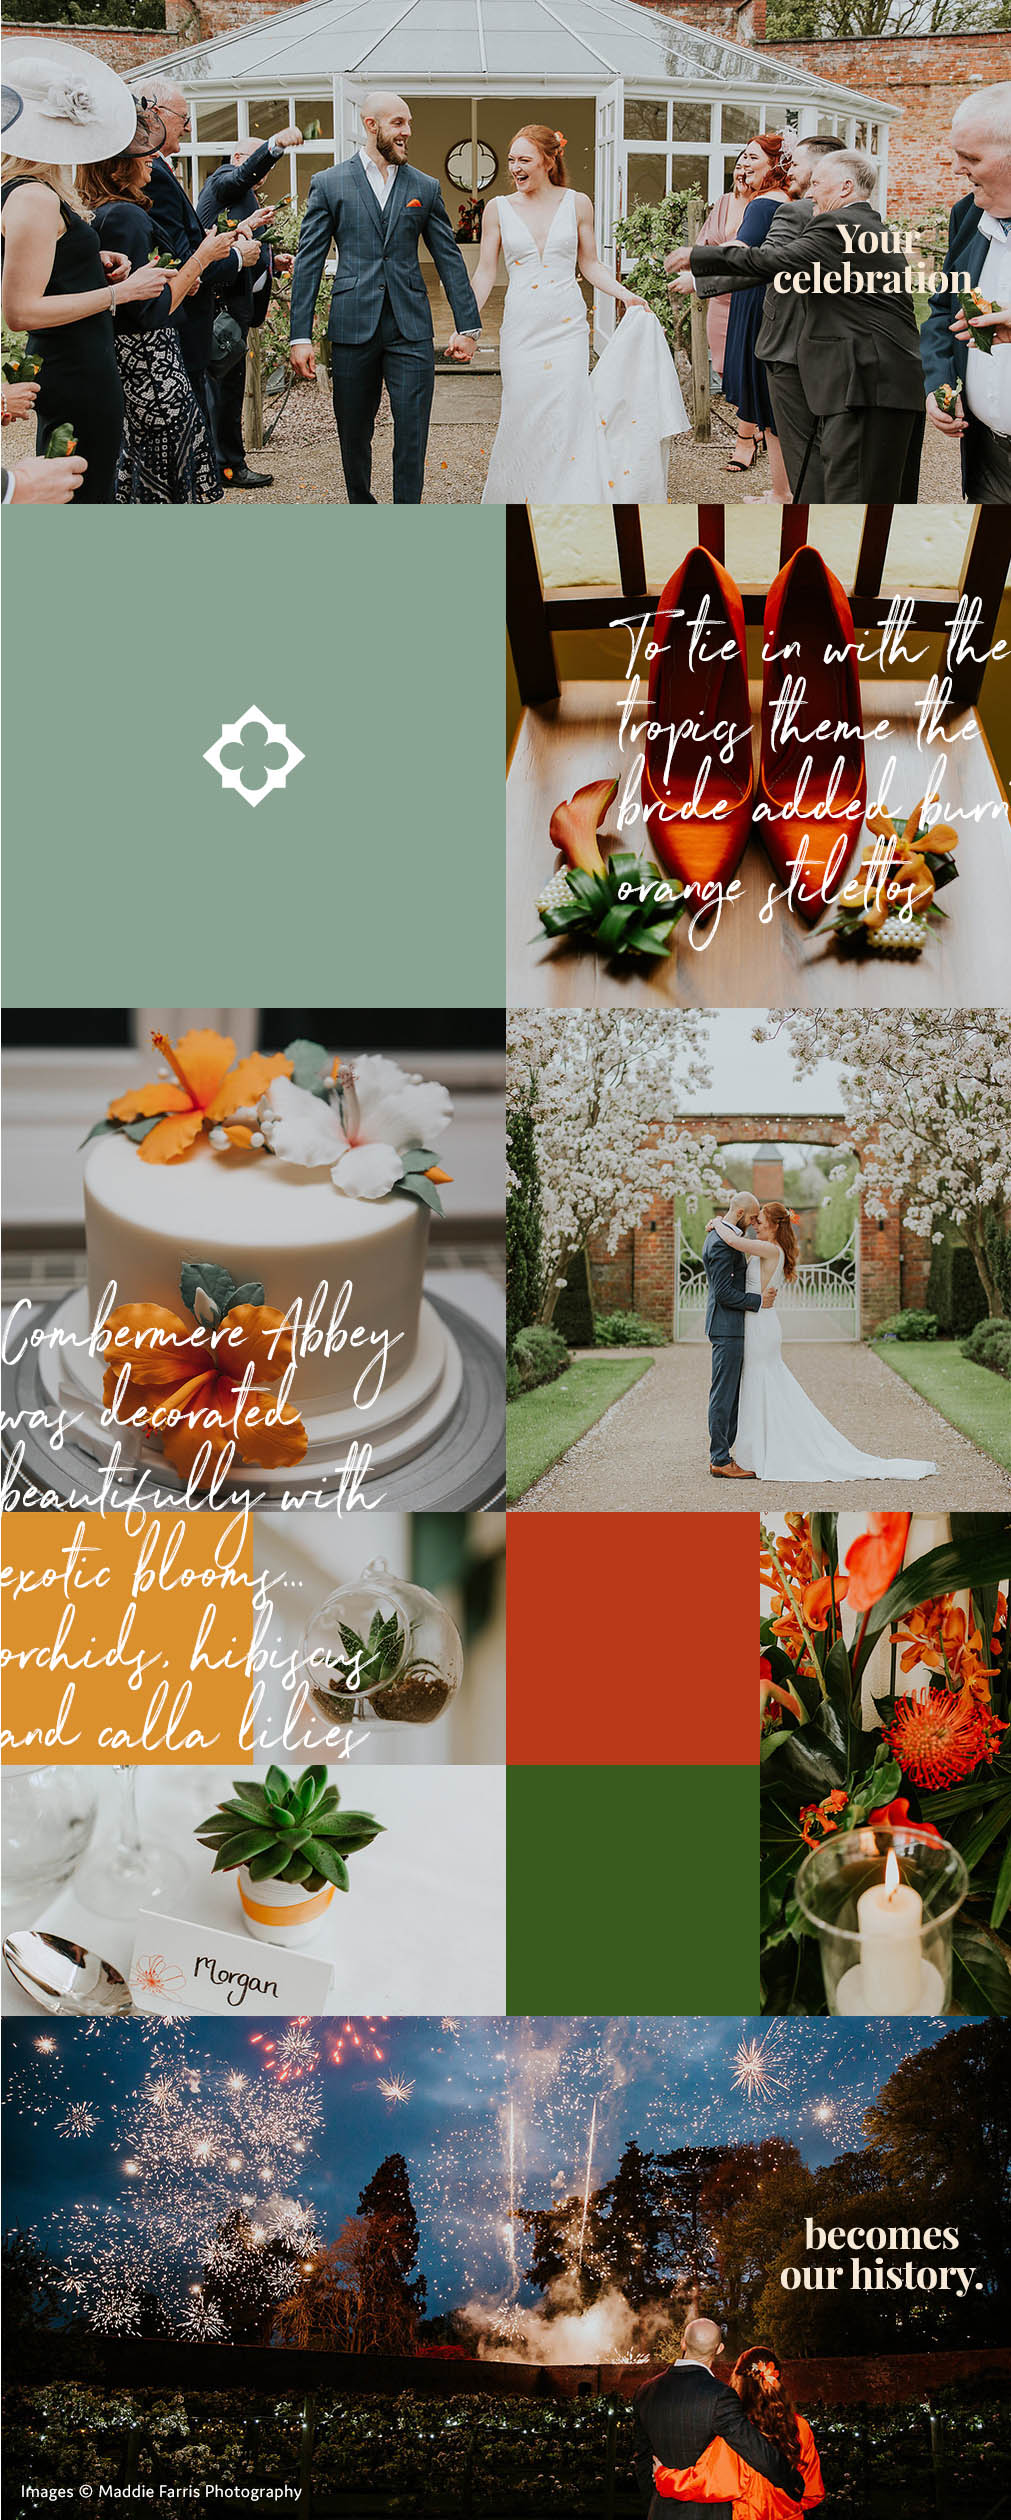 Helen & Sam's Intimate Tropical Wedding at Combermere Abbey